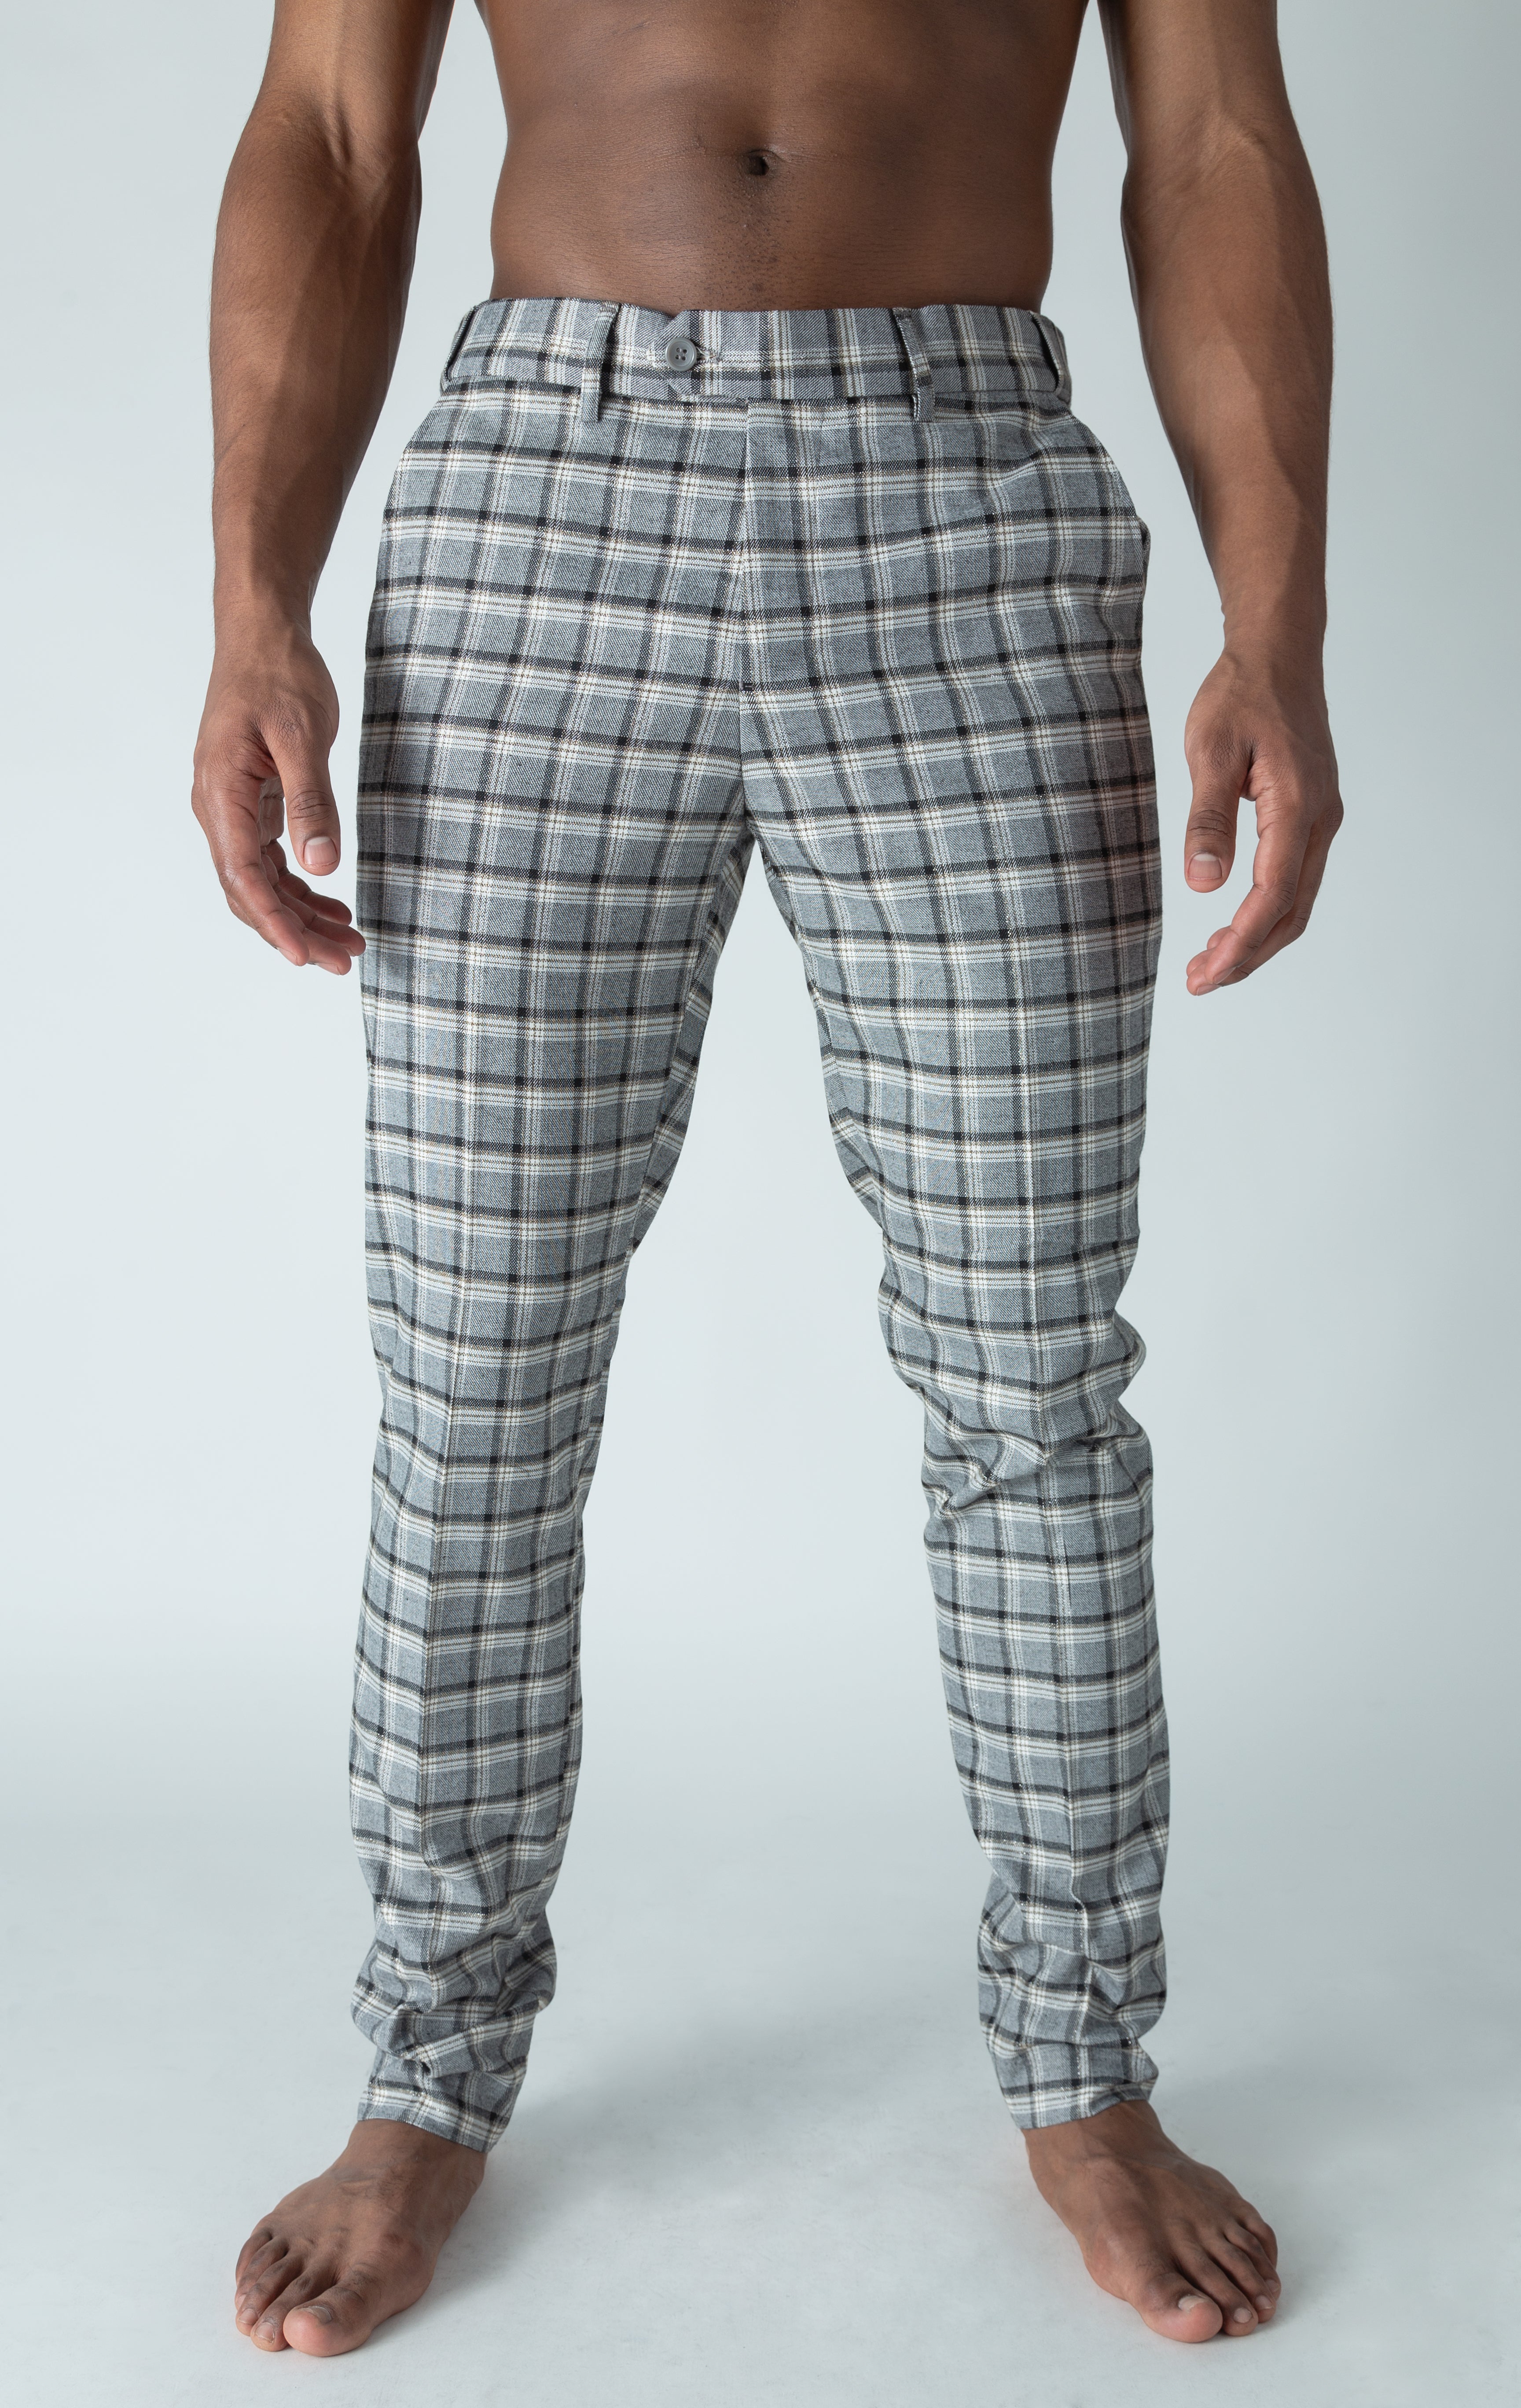 Men's grey chino pants with a checkered plaid design. The pants feature an elastic waistband for comfort and stretch, and are made from a lightweight cotton-spandex blend fabric. Inseam is 32 inches.